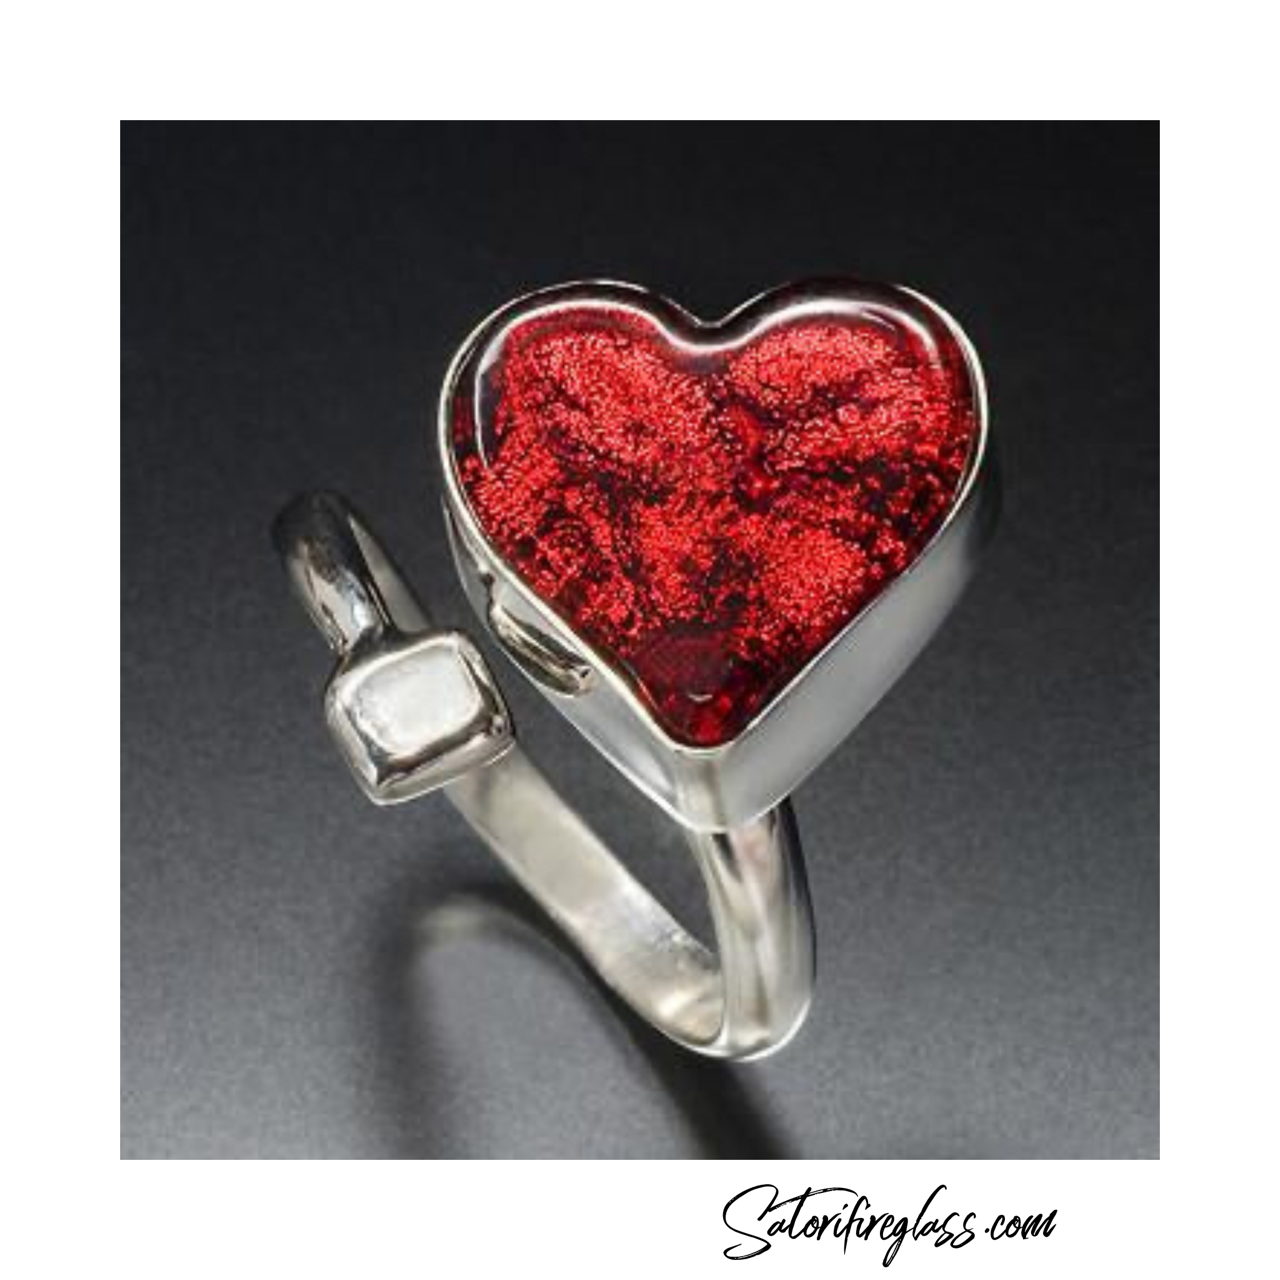 Lab-Created Ruby Heart Ring 1/8 ct tw Diamonds 10K Rose Gold | Kay